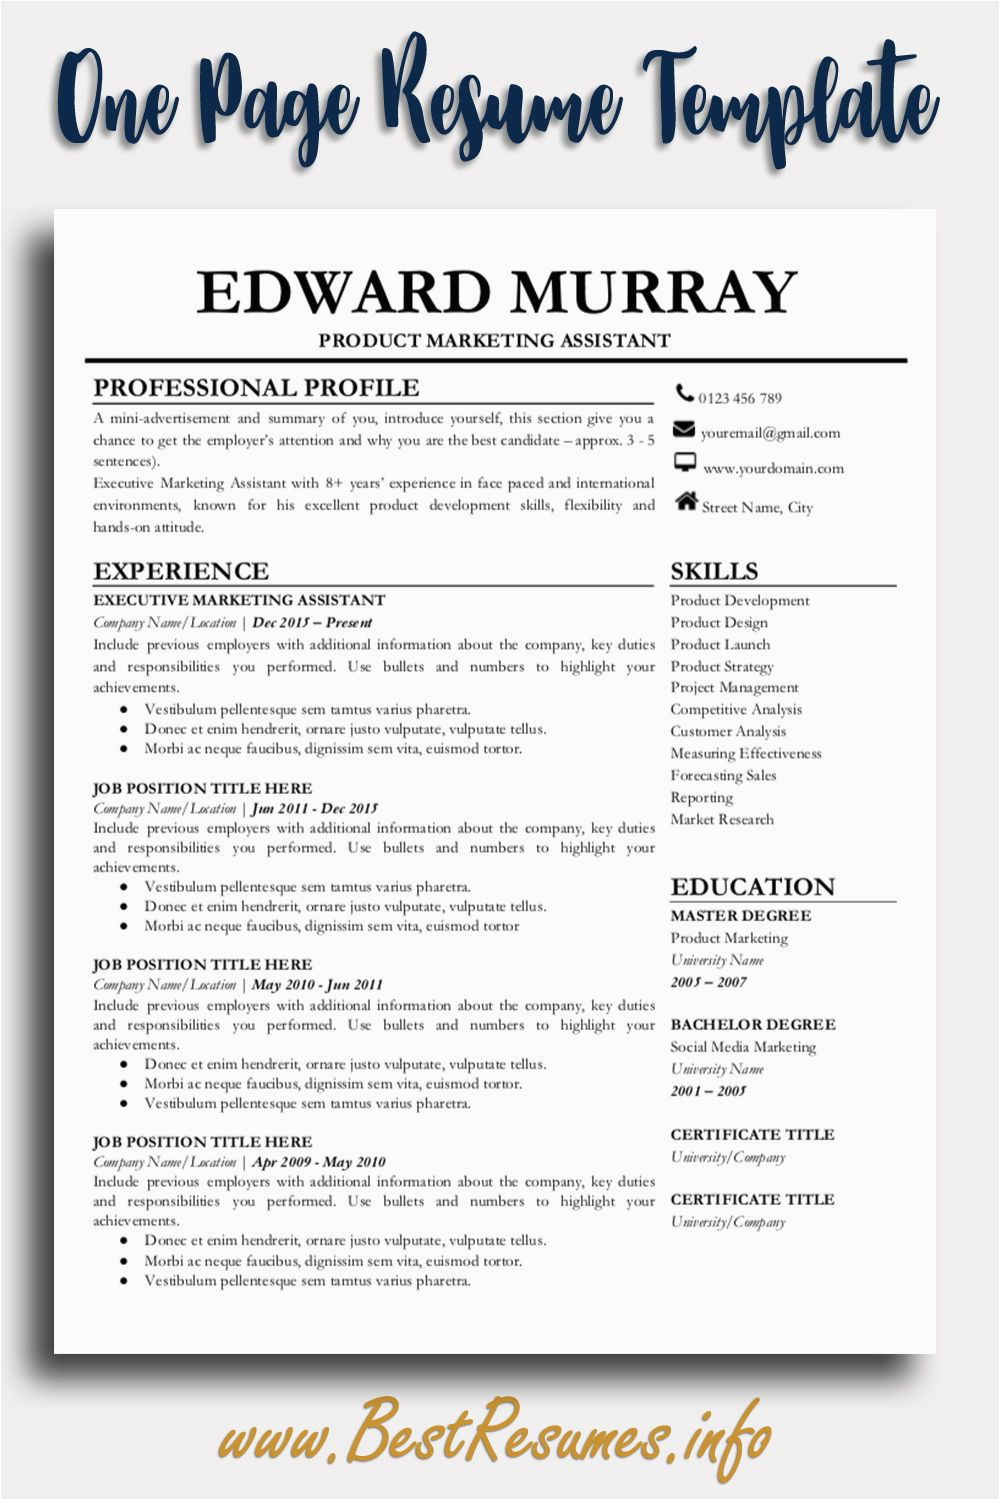 Resume Templates that are Actually Free Best Teacher Resume Templates Professional Resume